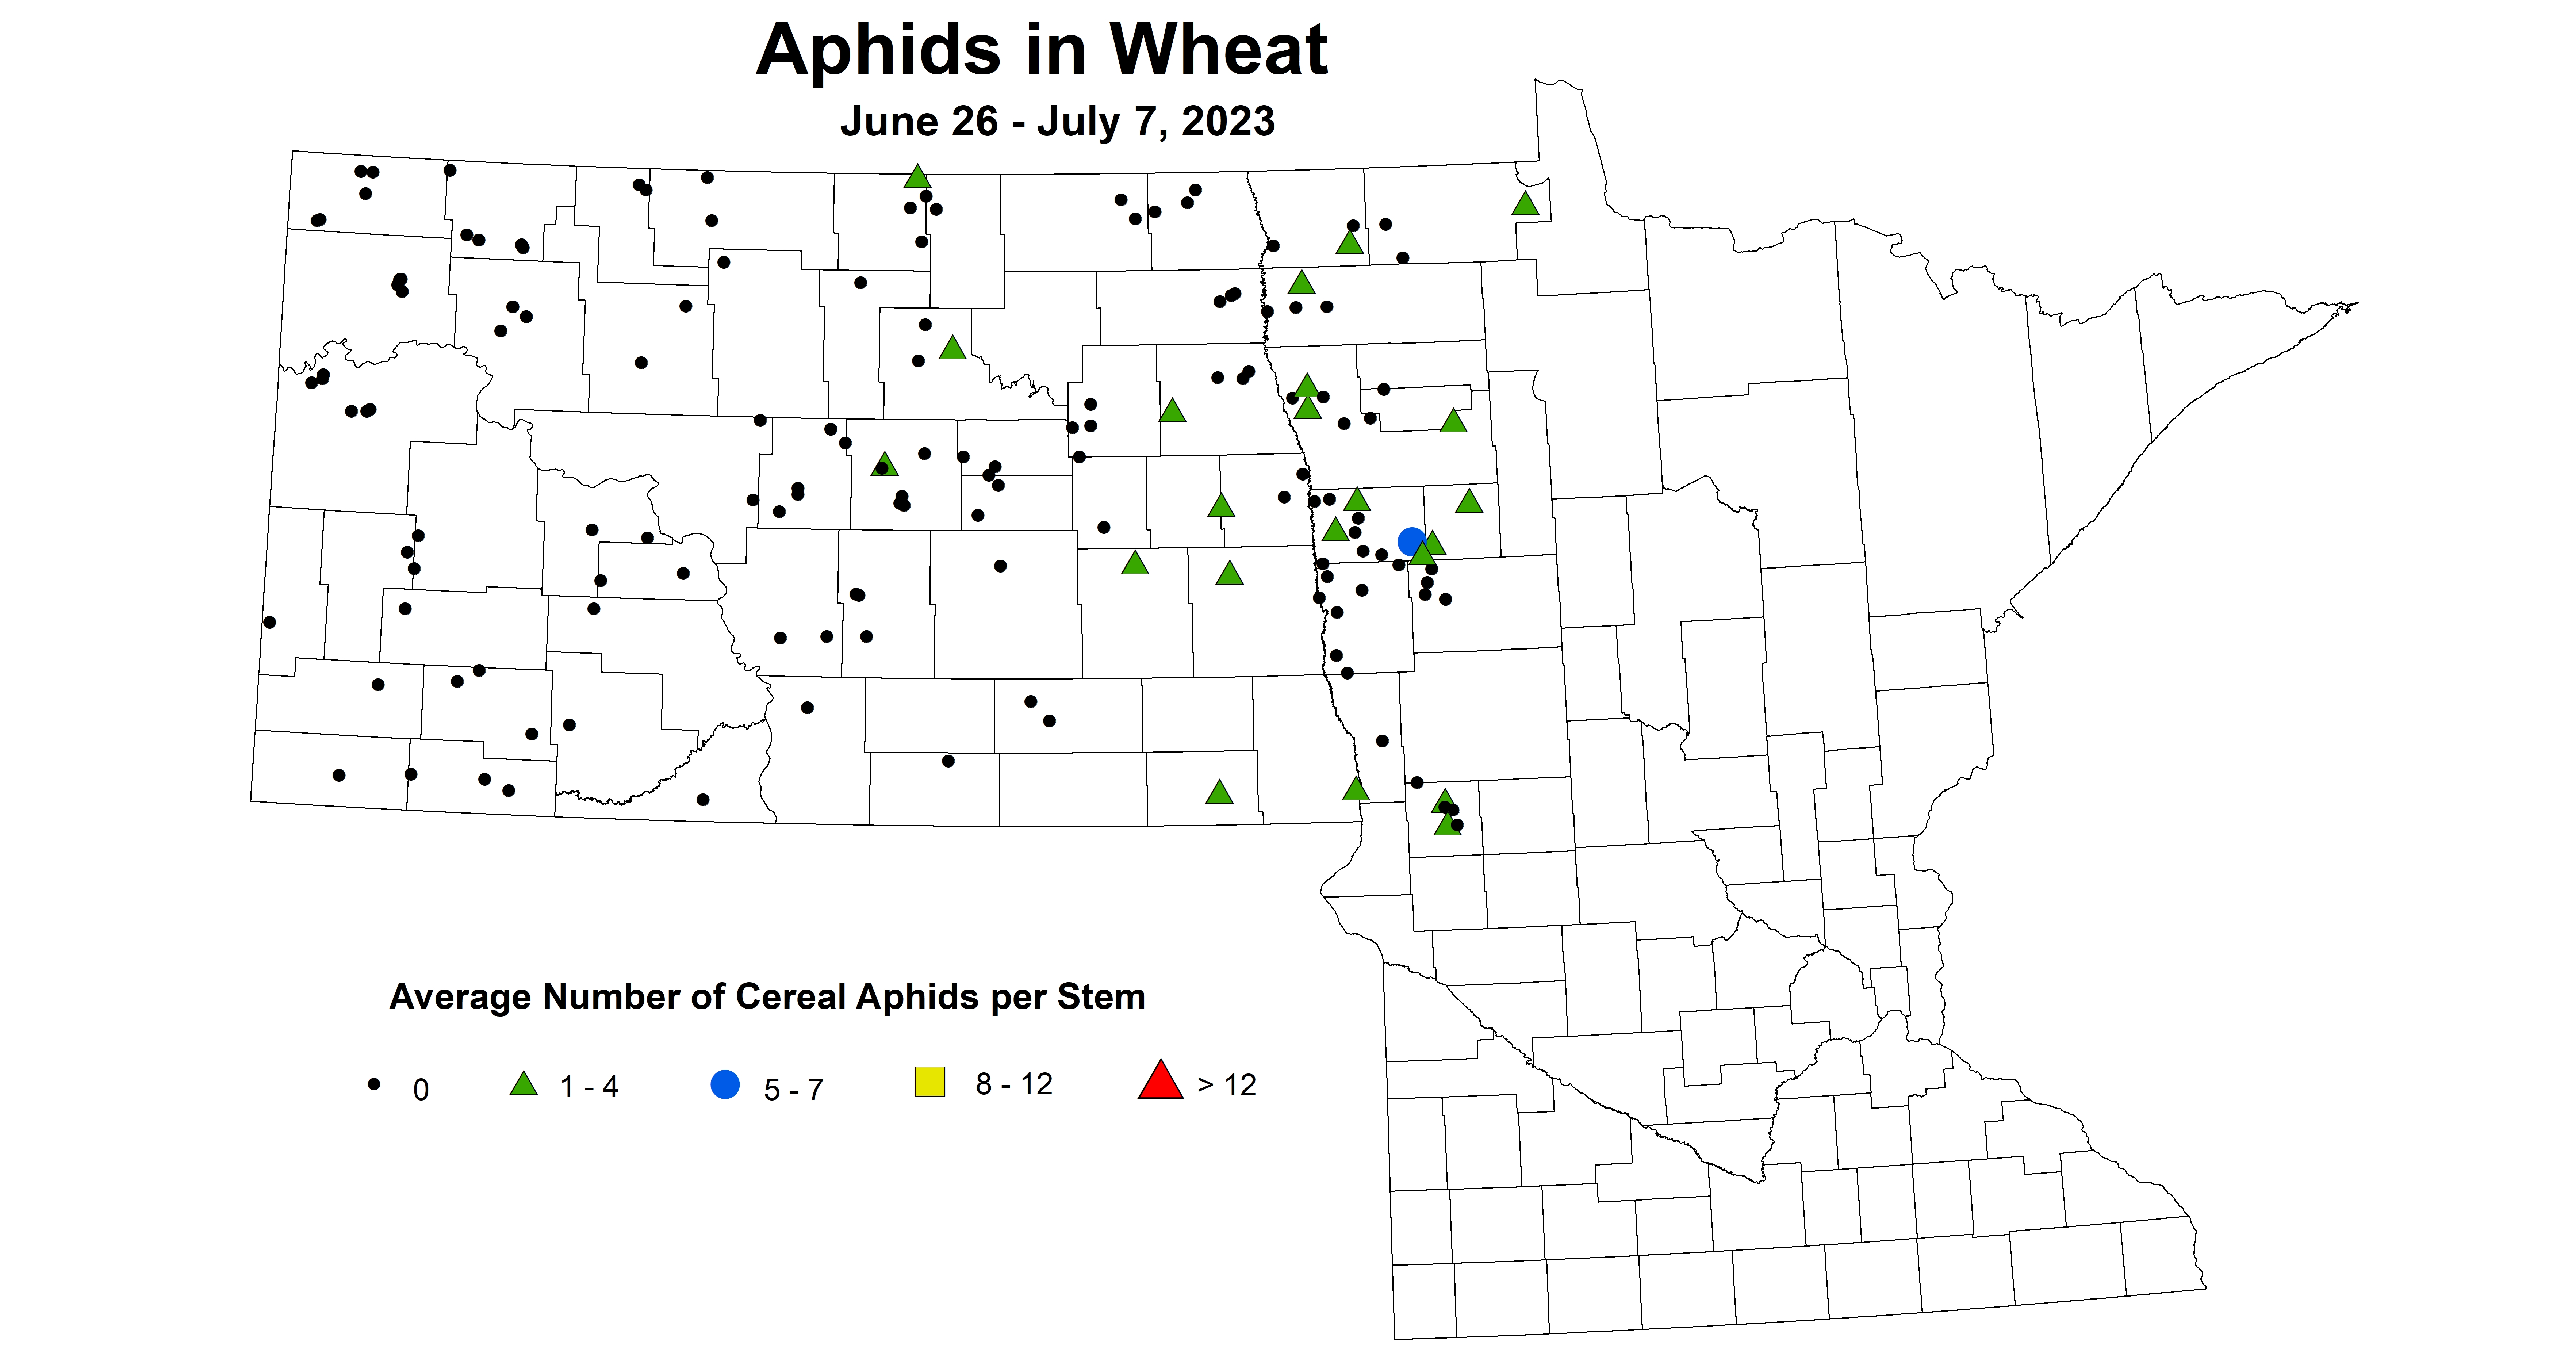 wheat aphids June 26 - July 7 2023